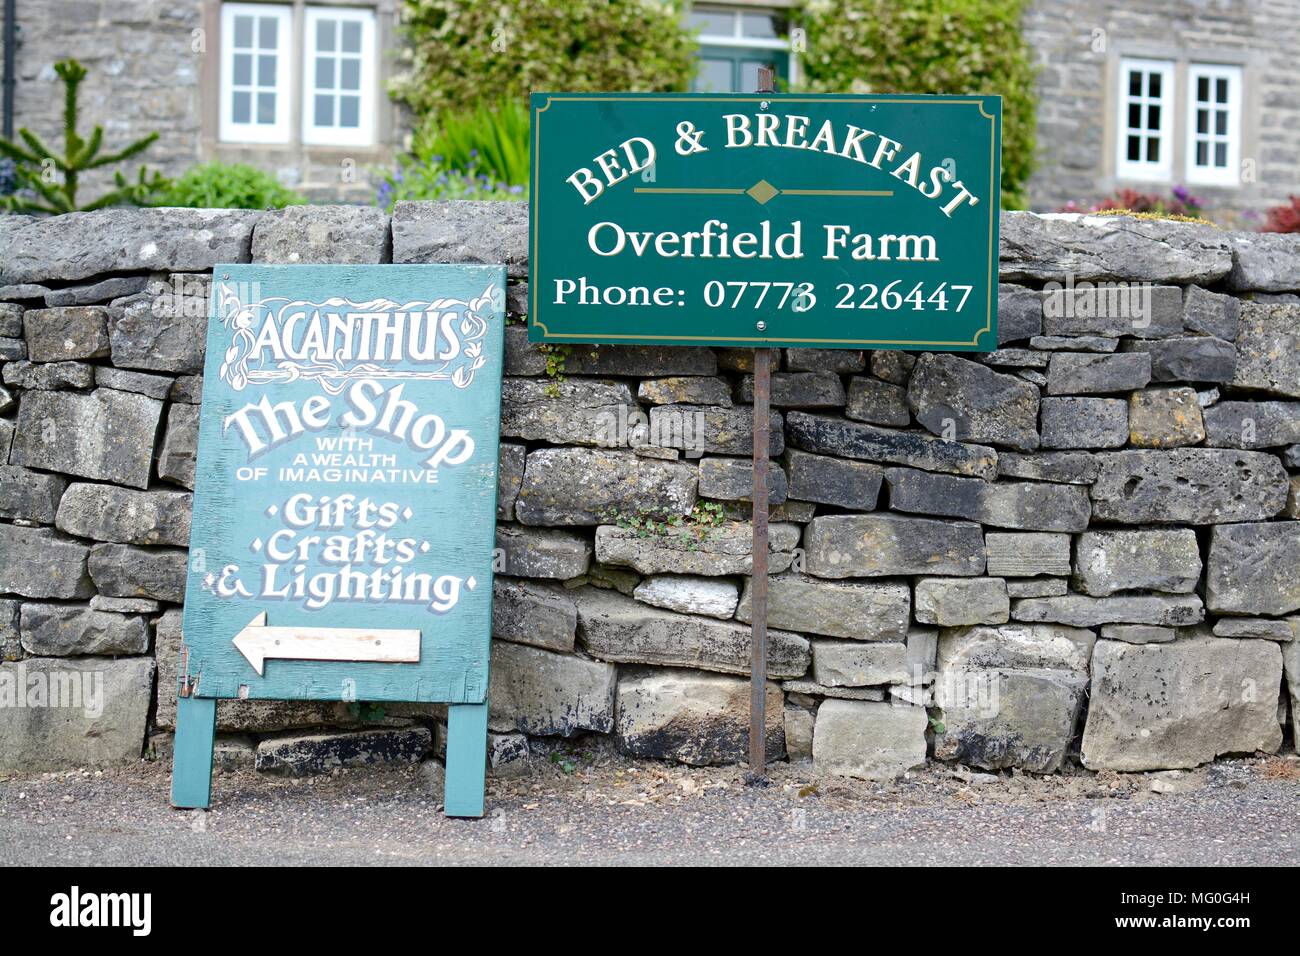 Overfield farm bed and breakfast sign and building in the village of Tissington, Derbyshire, England, UK Stock Photo